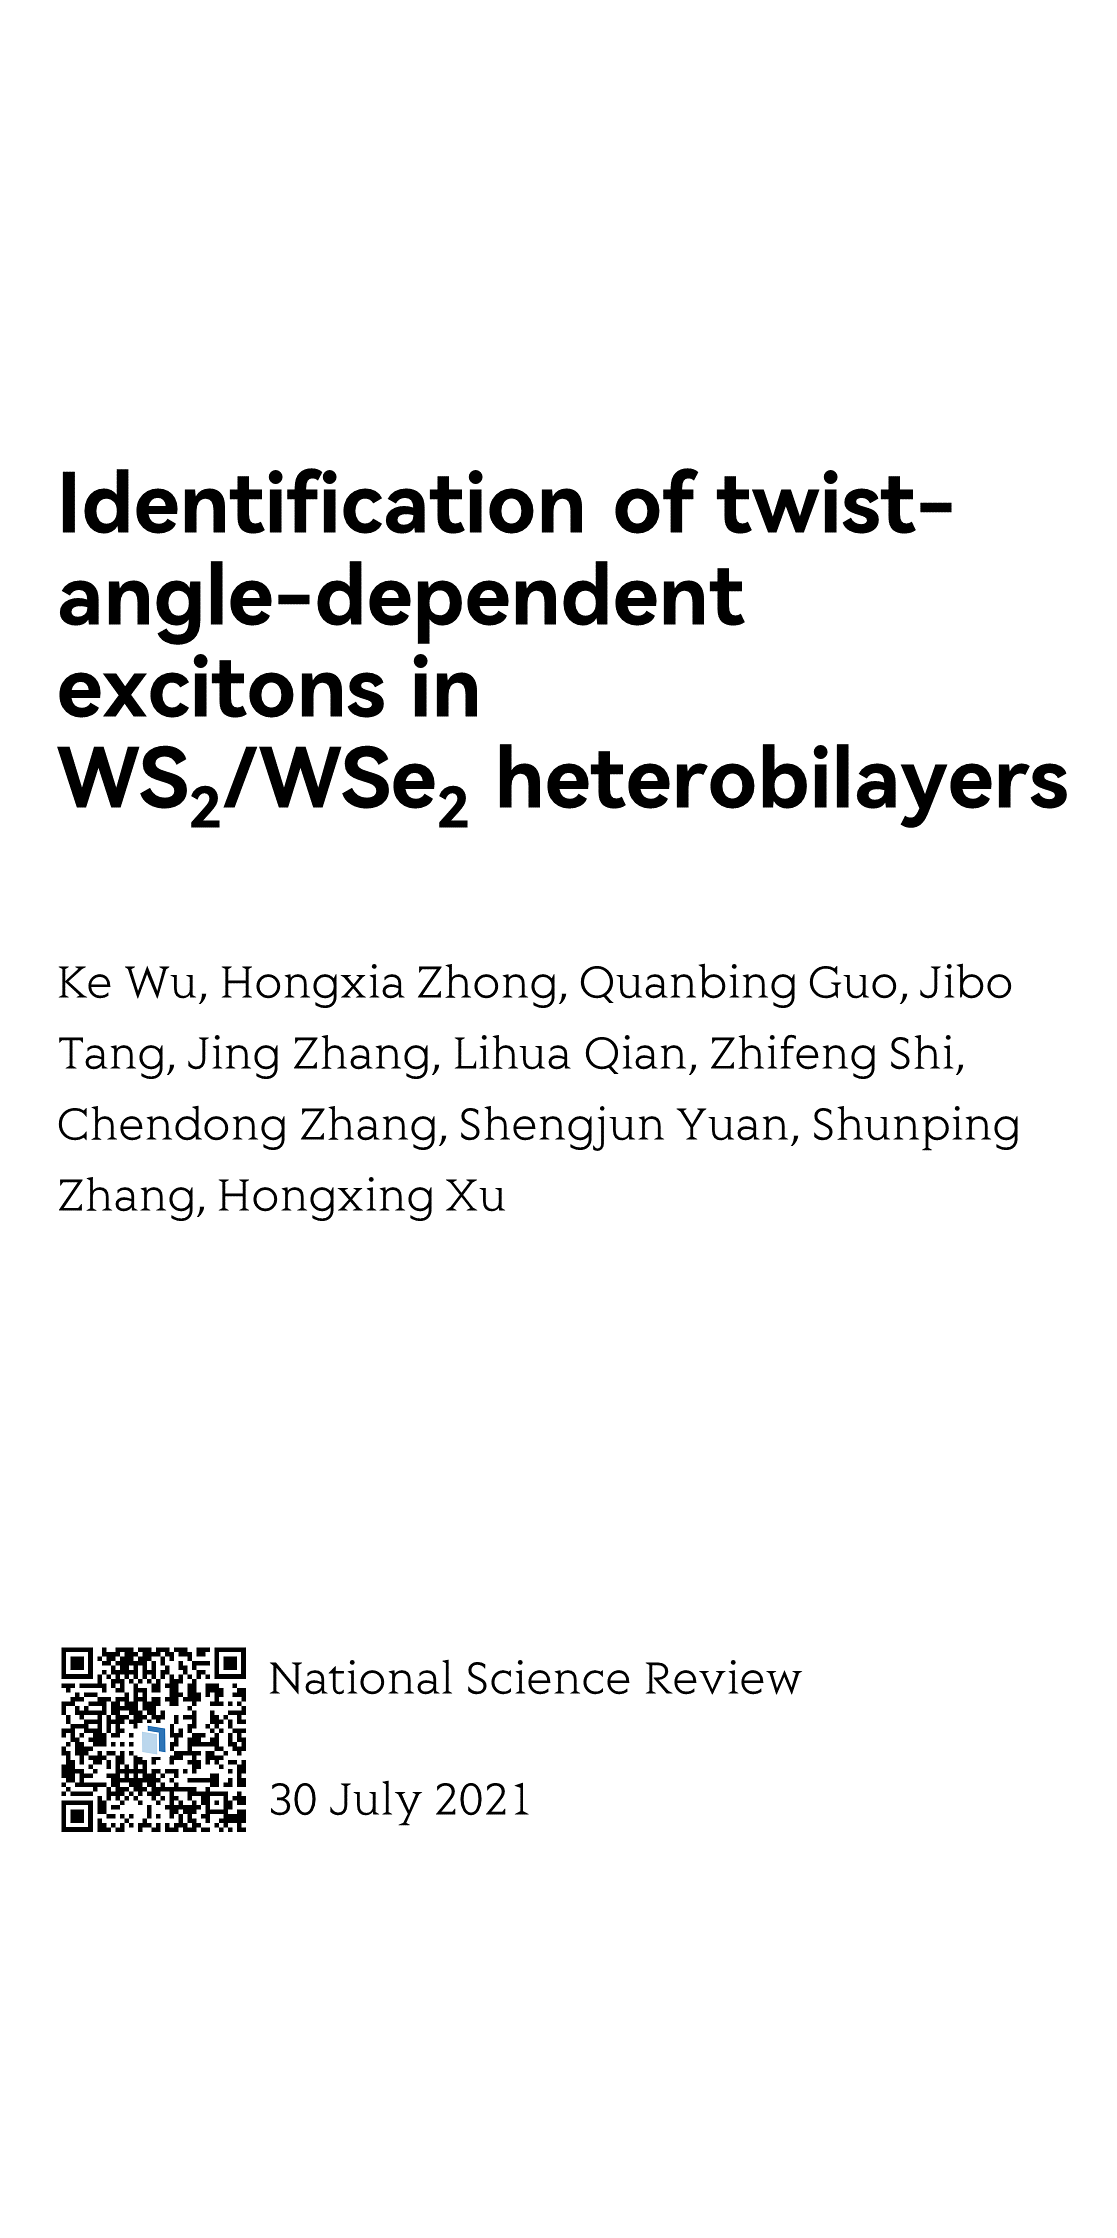 Identification of twist-angle-dependent excitons in WS₂/WSe₂ heterobilayers_1